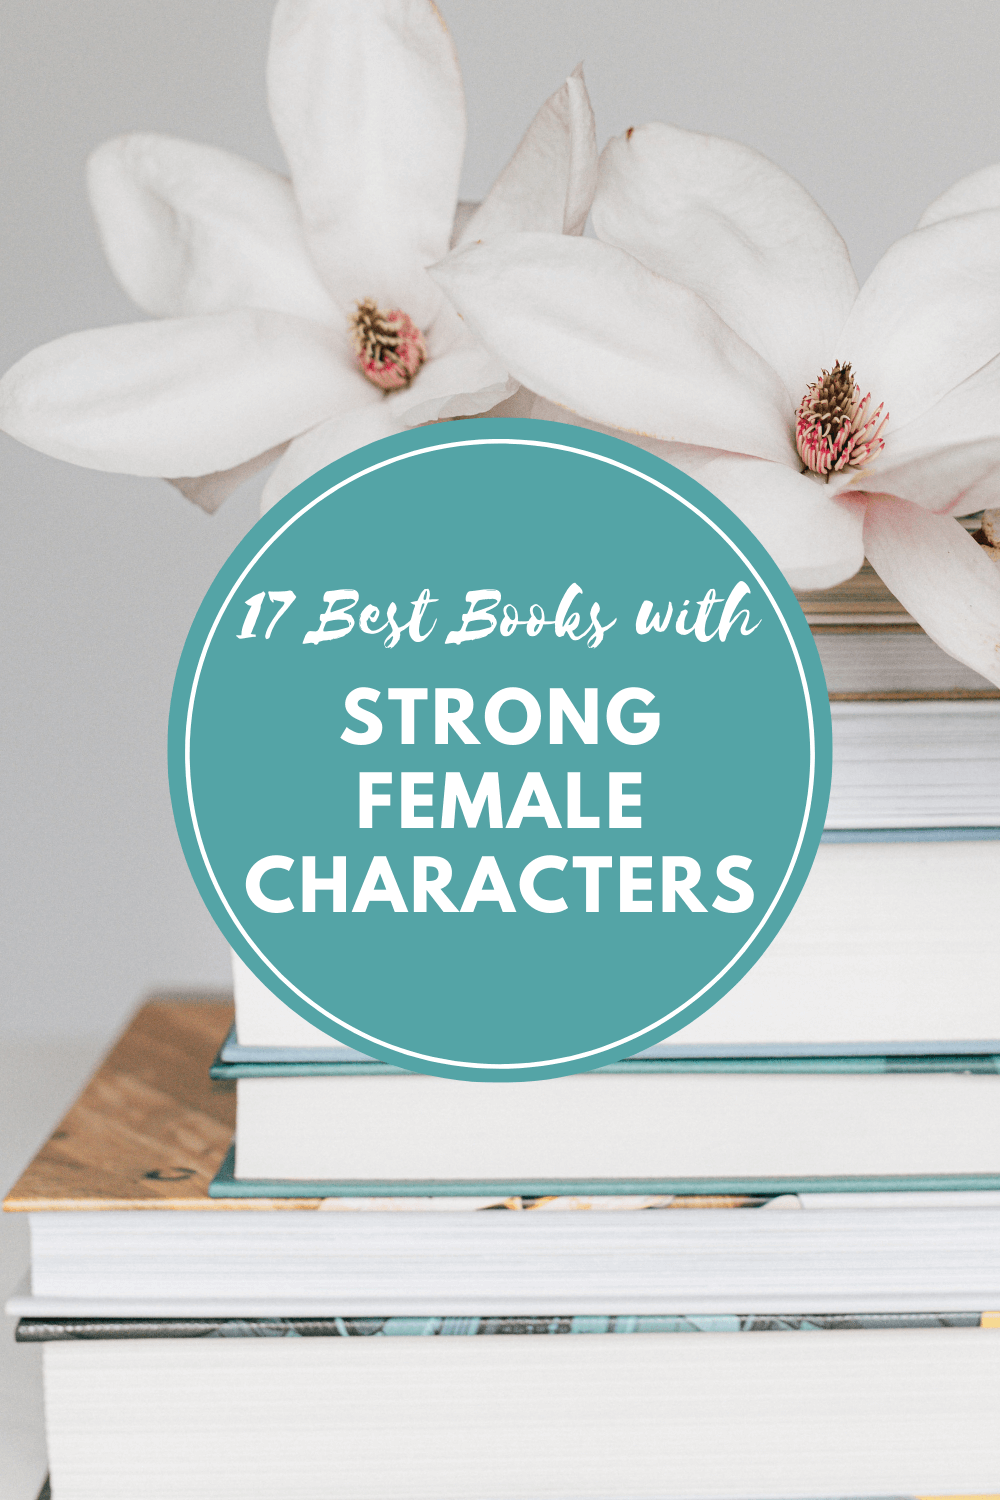 A stack of books with white flowers and the title, "17 Best Books with Strong Female Characters"